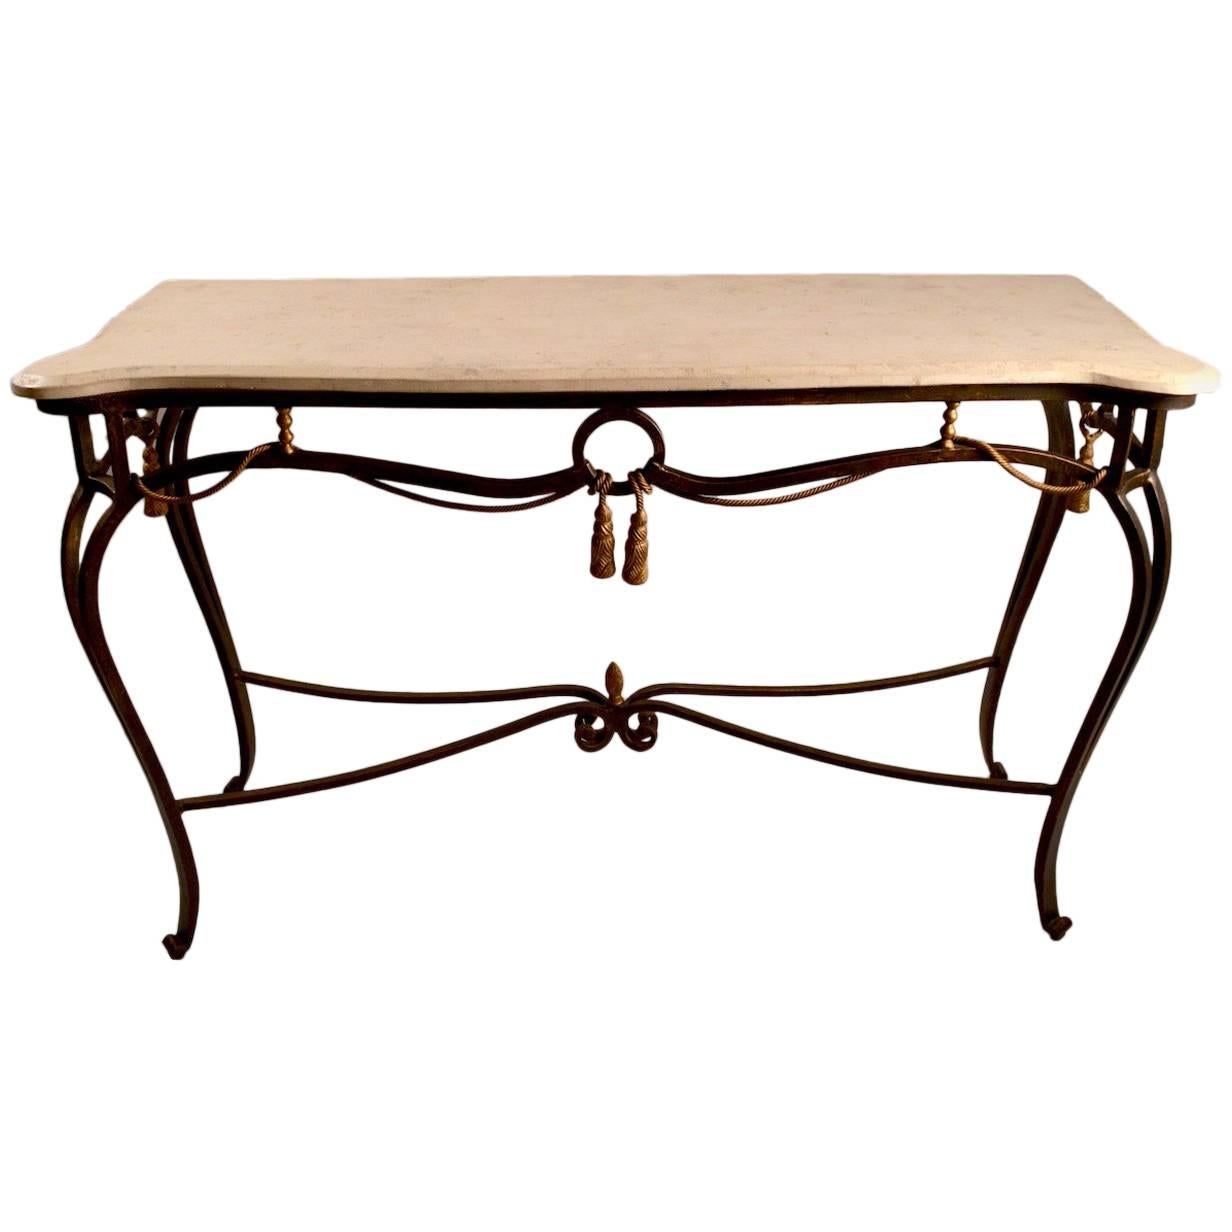 Iron and Tessellated Stone Console Attributed to Maitland-Smith